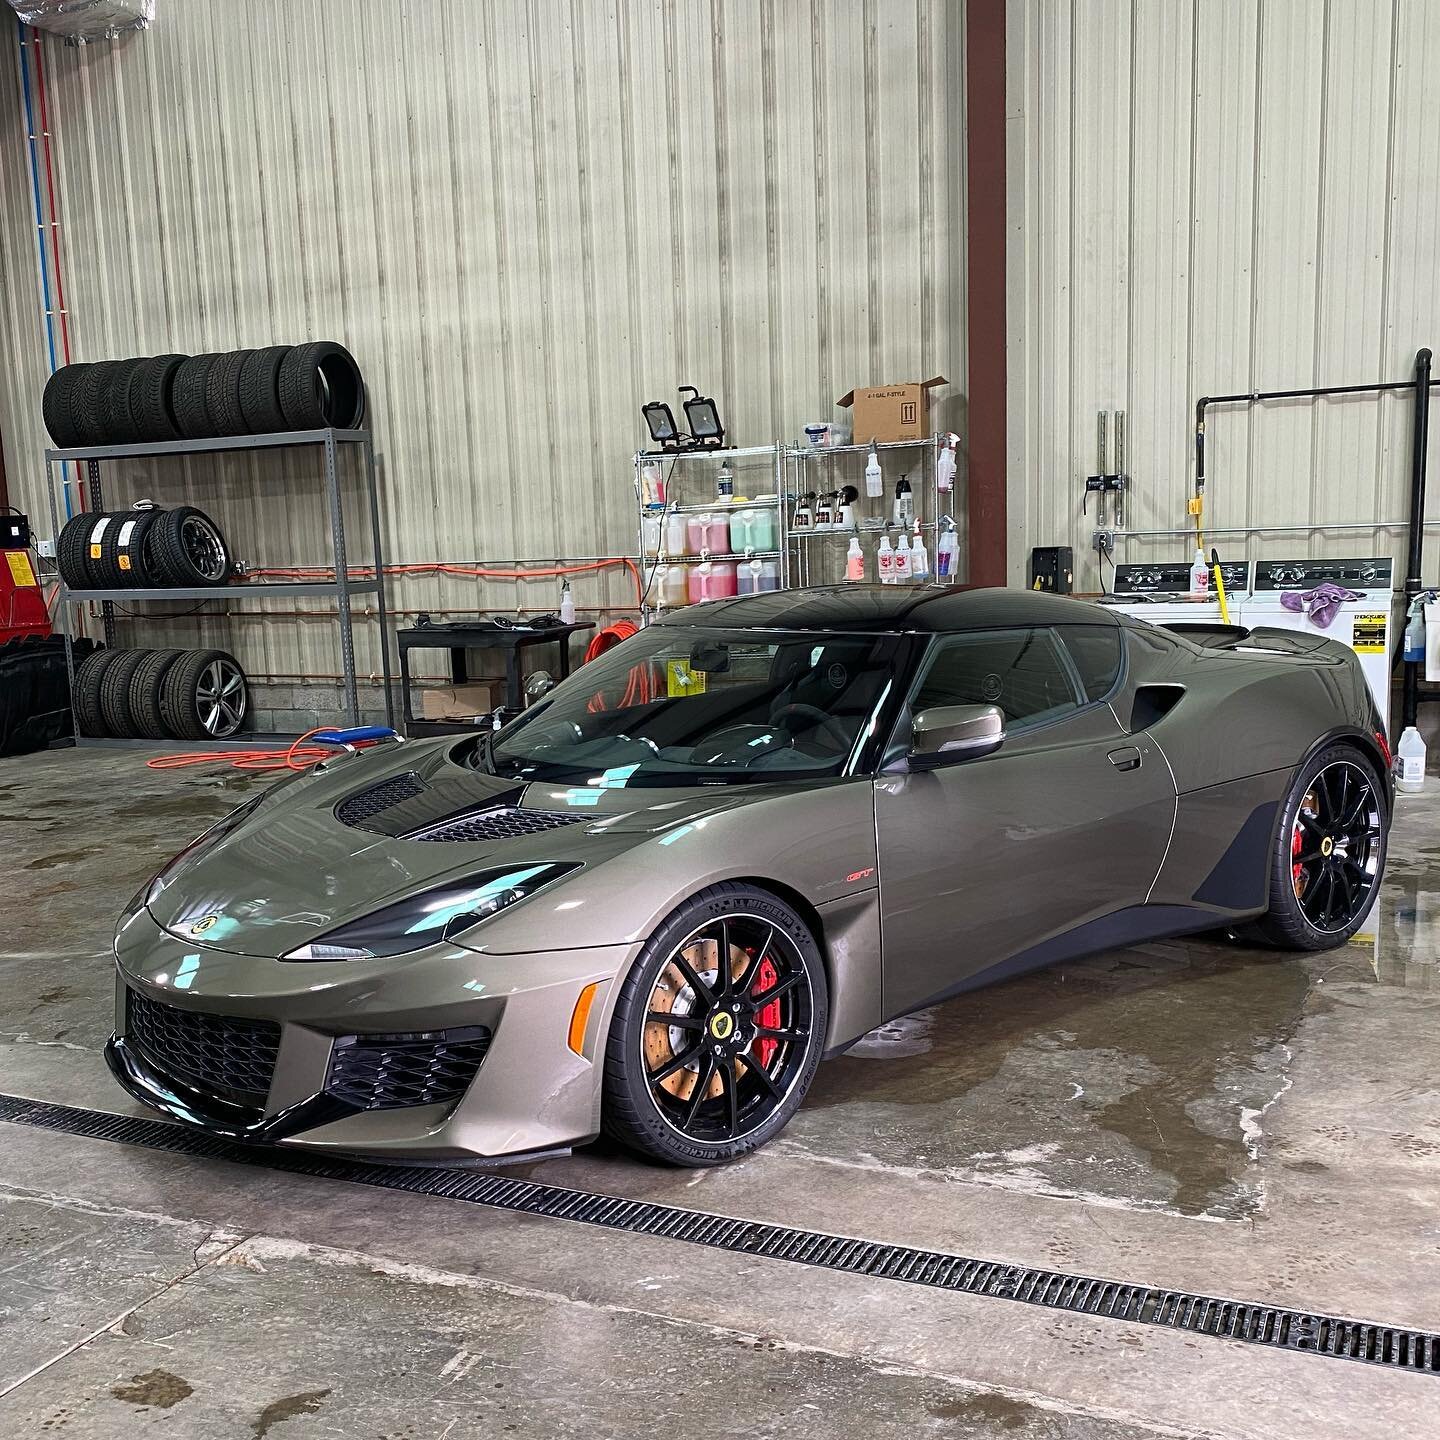 #Lotus #evoragt post wash up and prep for a quasi new car prep, wheels off detail, some @3m PPF, and a @jadeceramic #graphene coating. Look out for more shots of the process. @detailkingofficial #pittsburghdetailing #paintcorrection #ceramiccoating #